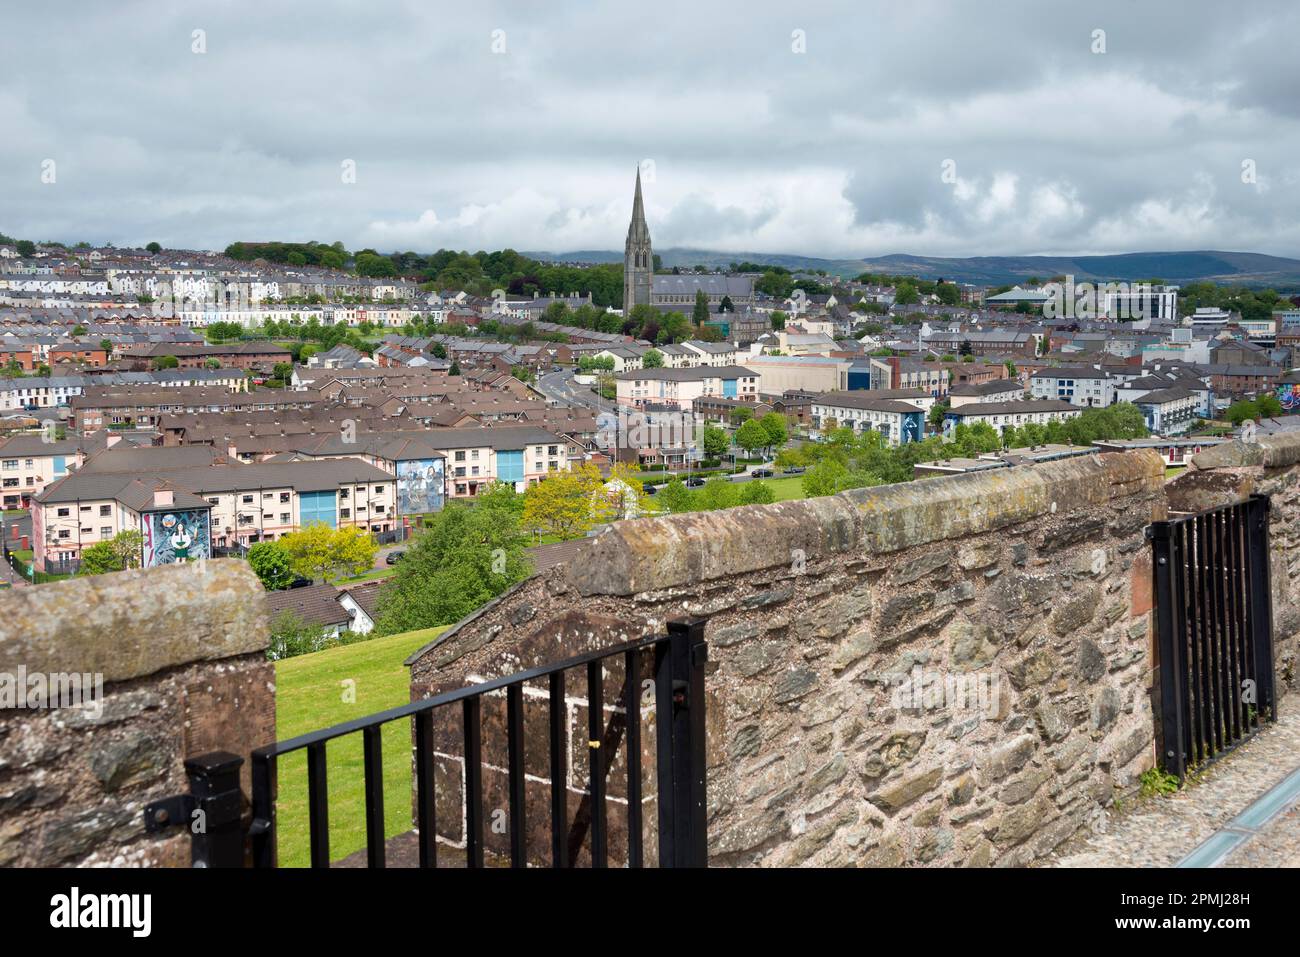 On the City Wall, Derry, Londonderry, Northern Ireland, United Kingdom Stock Photo